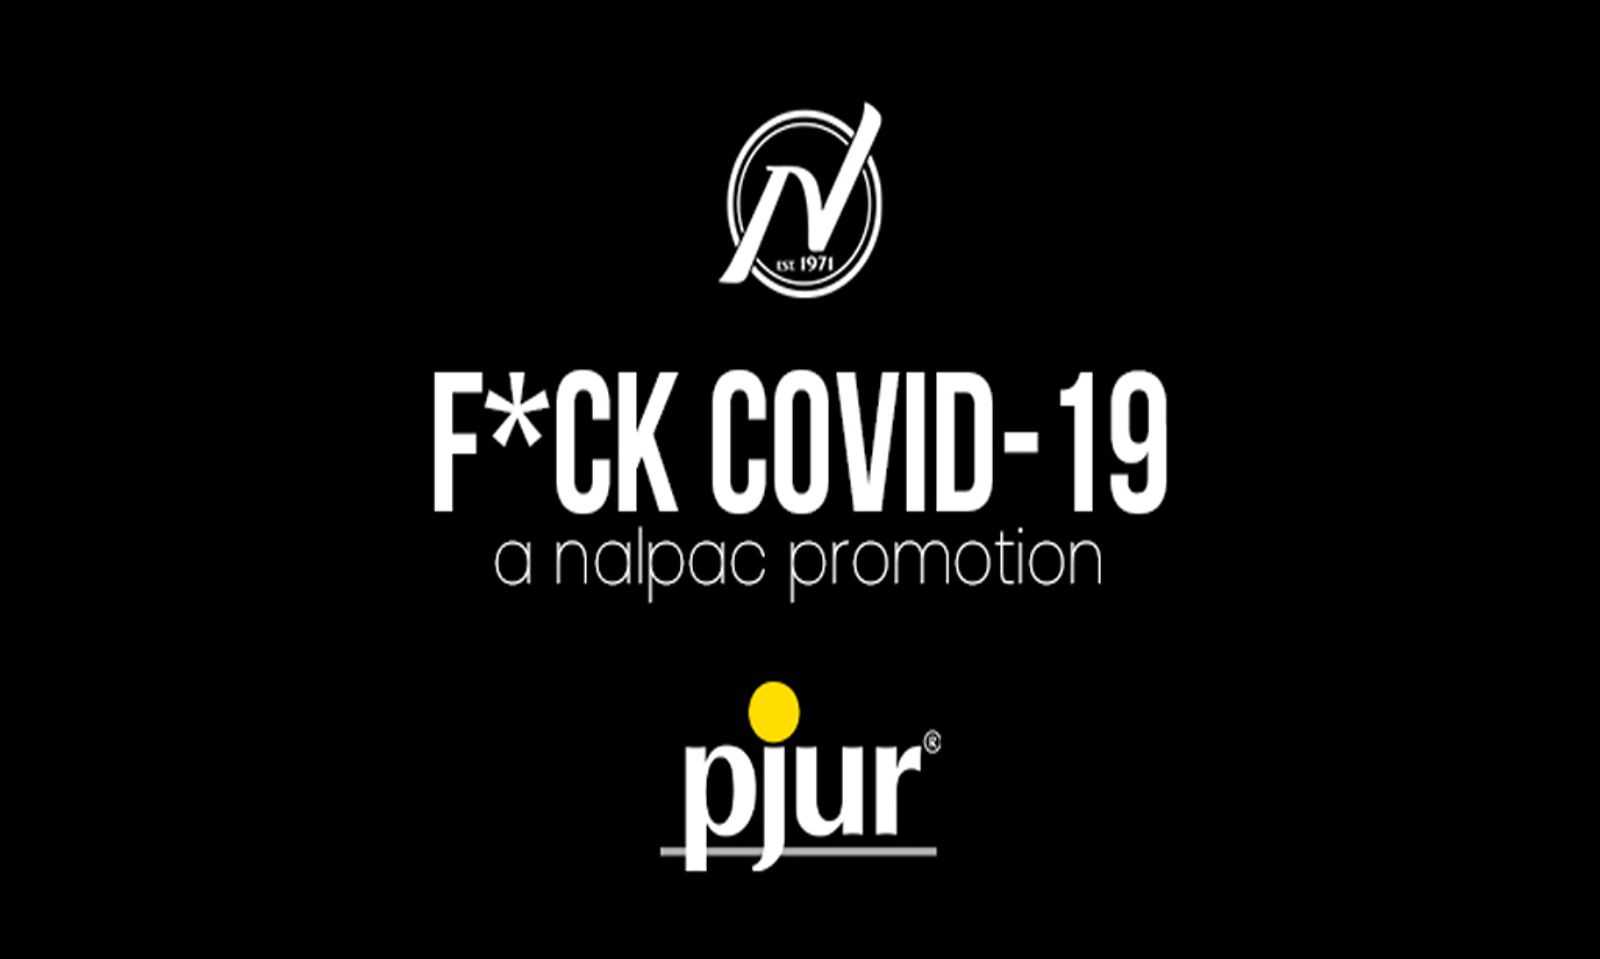 Nalpac and Pjur Team Up for Week 18 of the F*ck Covid19 Campaign